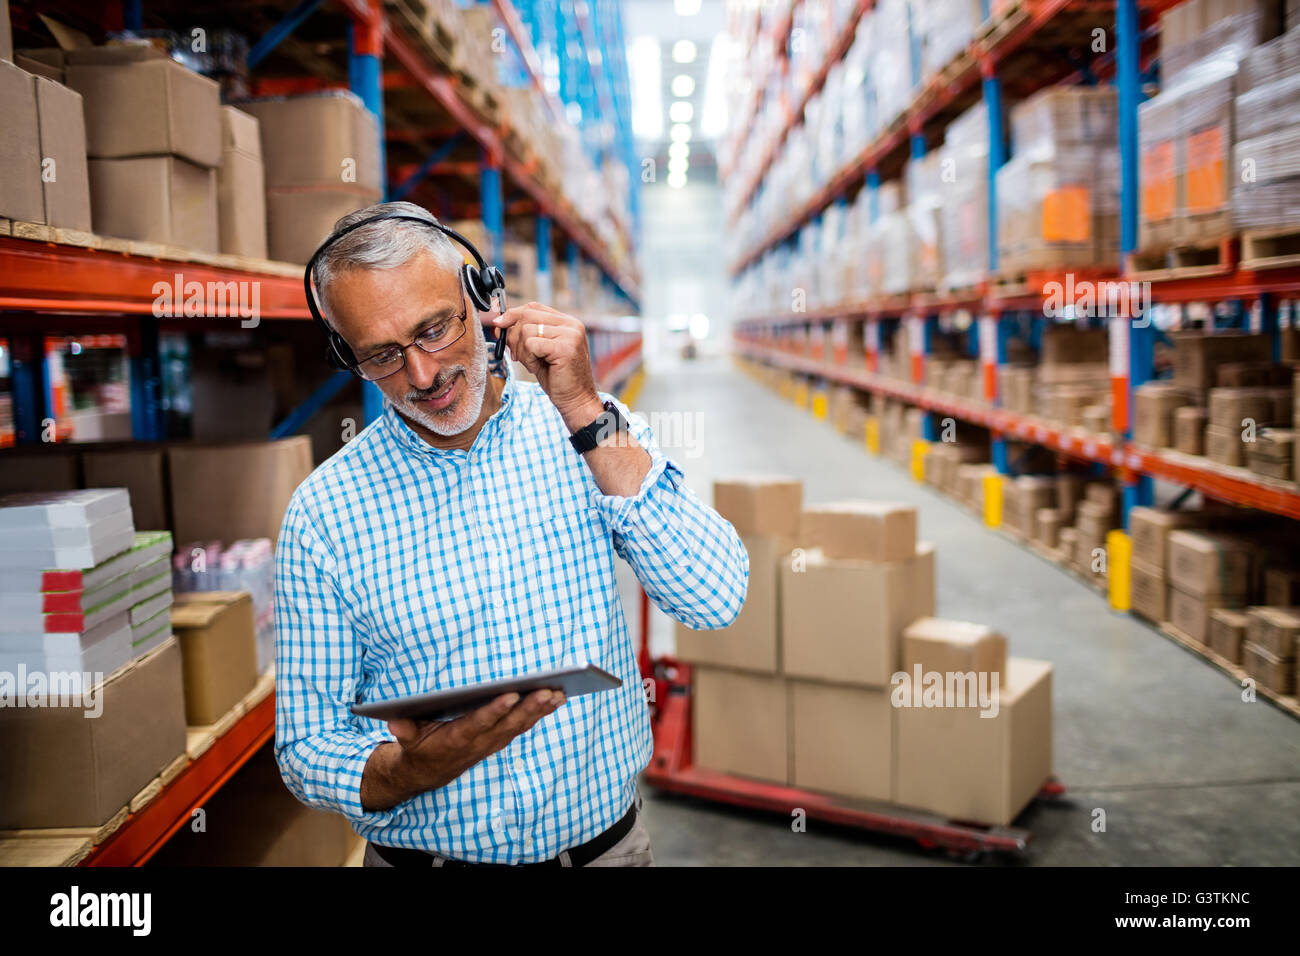 Manager using technology Stock Photo